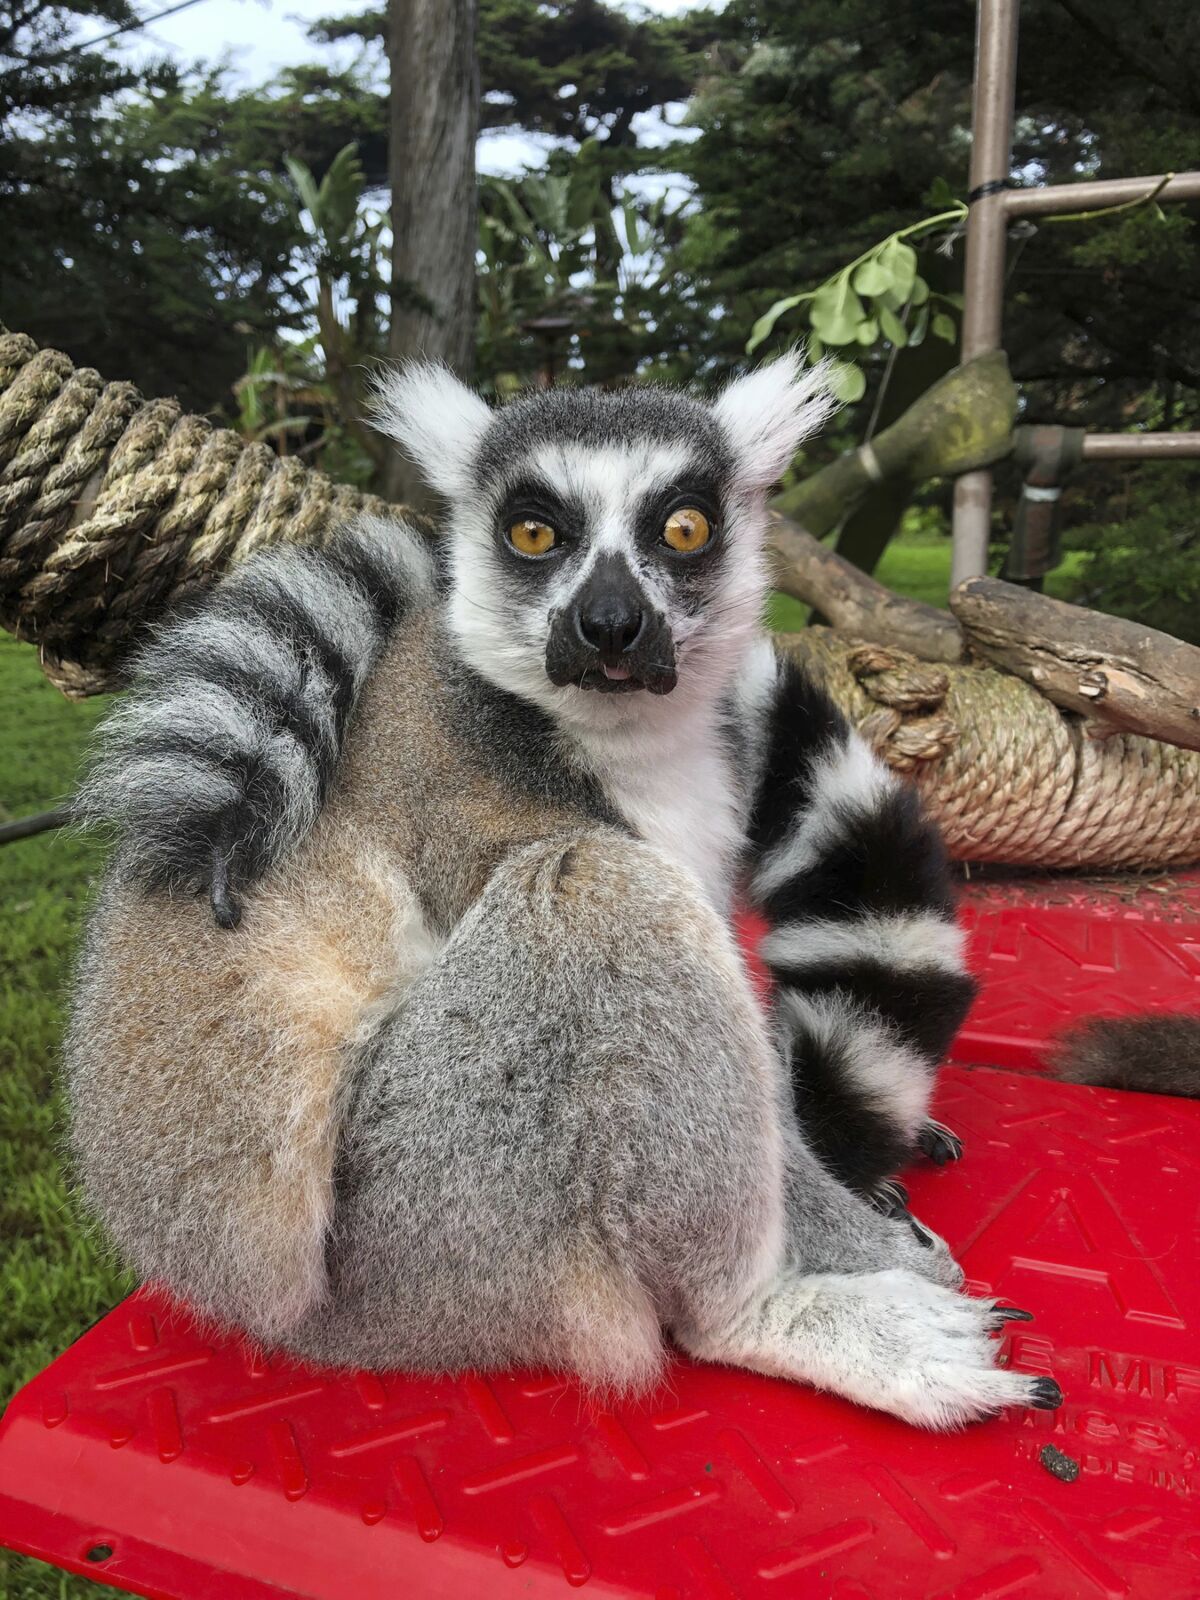 This Dec. 17, 2018, photo provided by the San Francisco Police courtesy of the San Francisco Zoo, shows a missing lemur, named Maki. The ring-tailed lemur was missing from the San Francisco Zoo after someone broke into an enclosure overnight and stole the endangered animal, police said Wednesday, Oct. 14, 2020. The 21-year-old male lemur was discovered missing shortly before the zoo opened to visitors, zoo and police officials said. They're seeking tips from the public in hopes of finding the lemur, explaining that Maki is an endangered animal that requires specialized care. (Marianne V. Hale/San Francisco Zoo via AP)